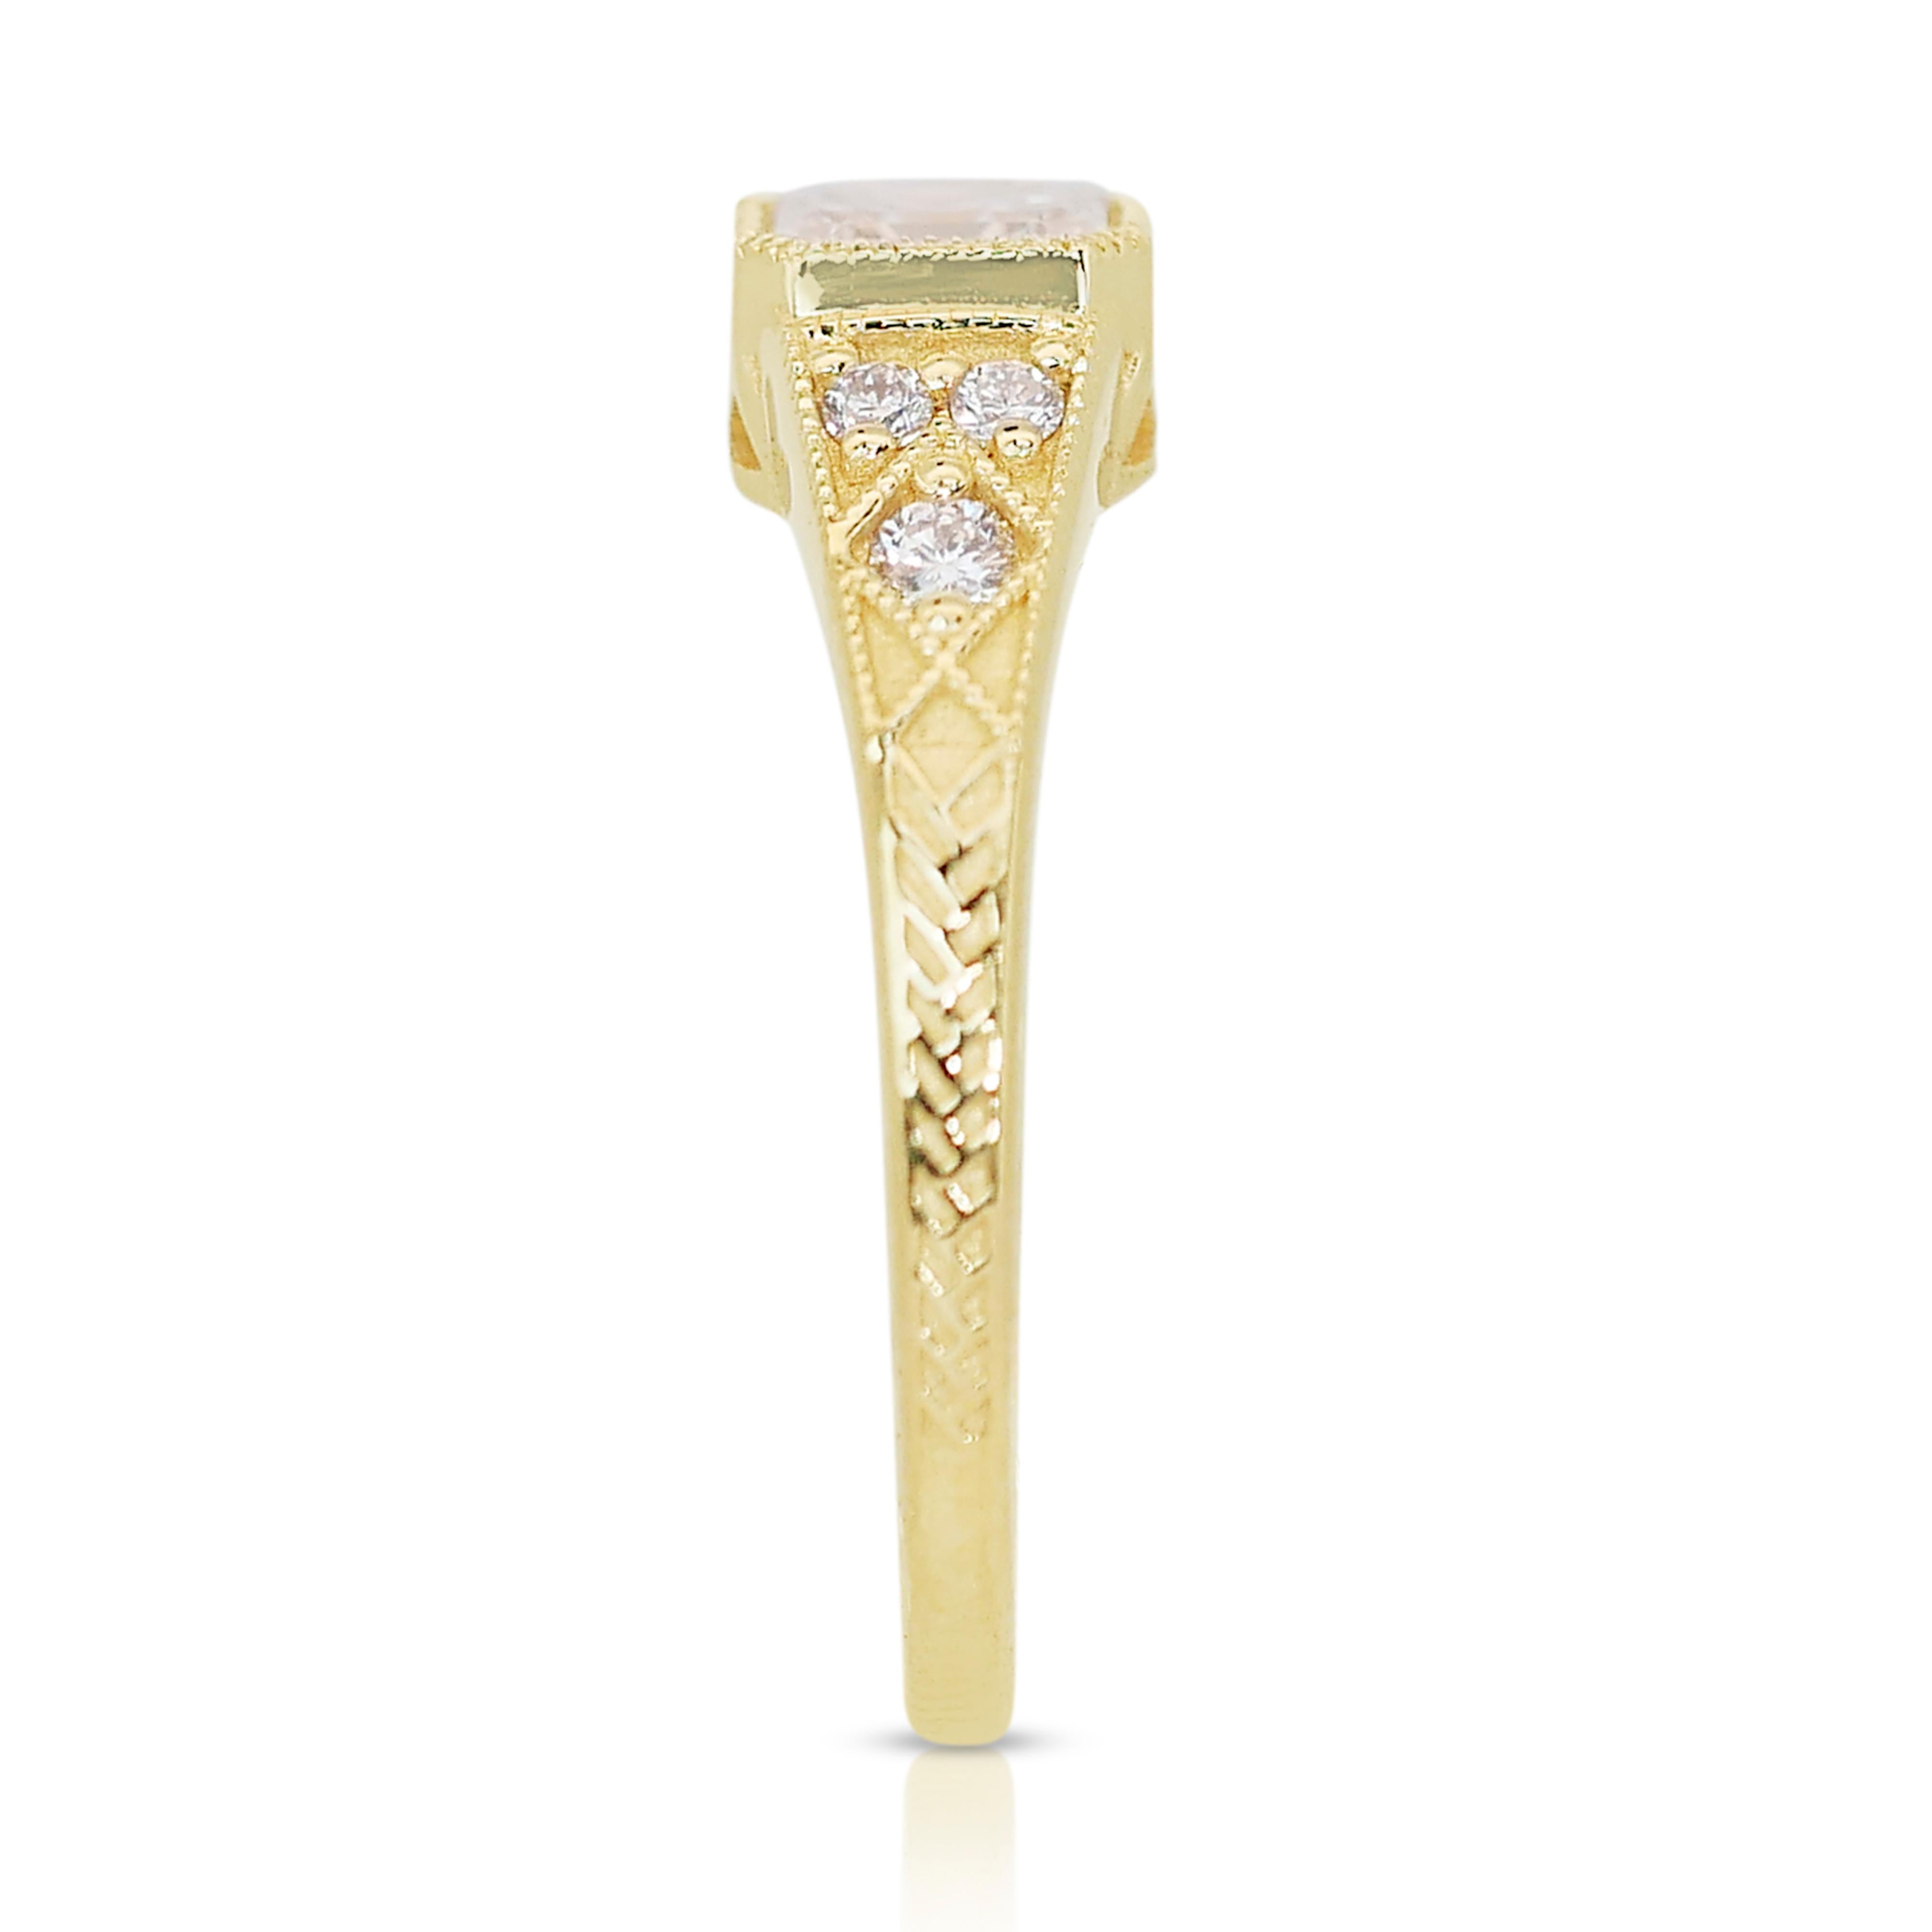 Beautiful 1.17ct Diamonds Pave Ring in 18k Yellow Gold - GIA Certified For Sale 1